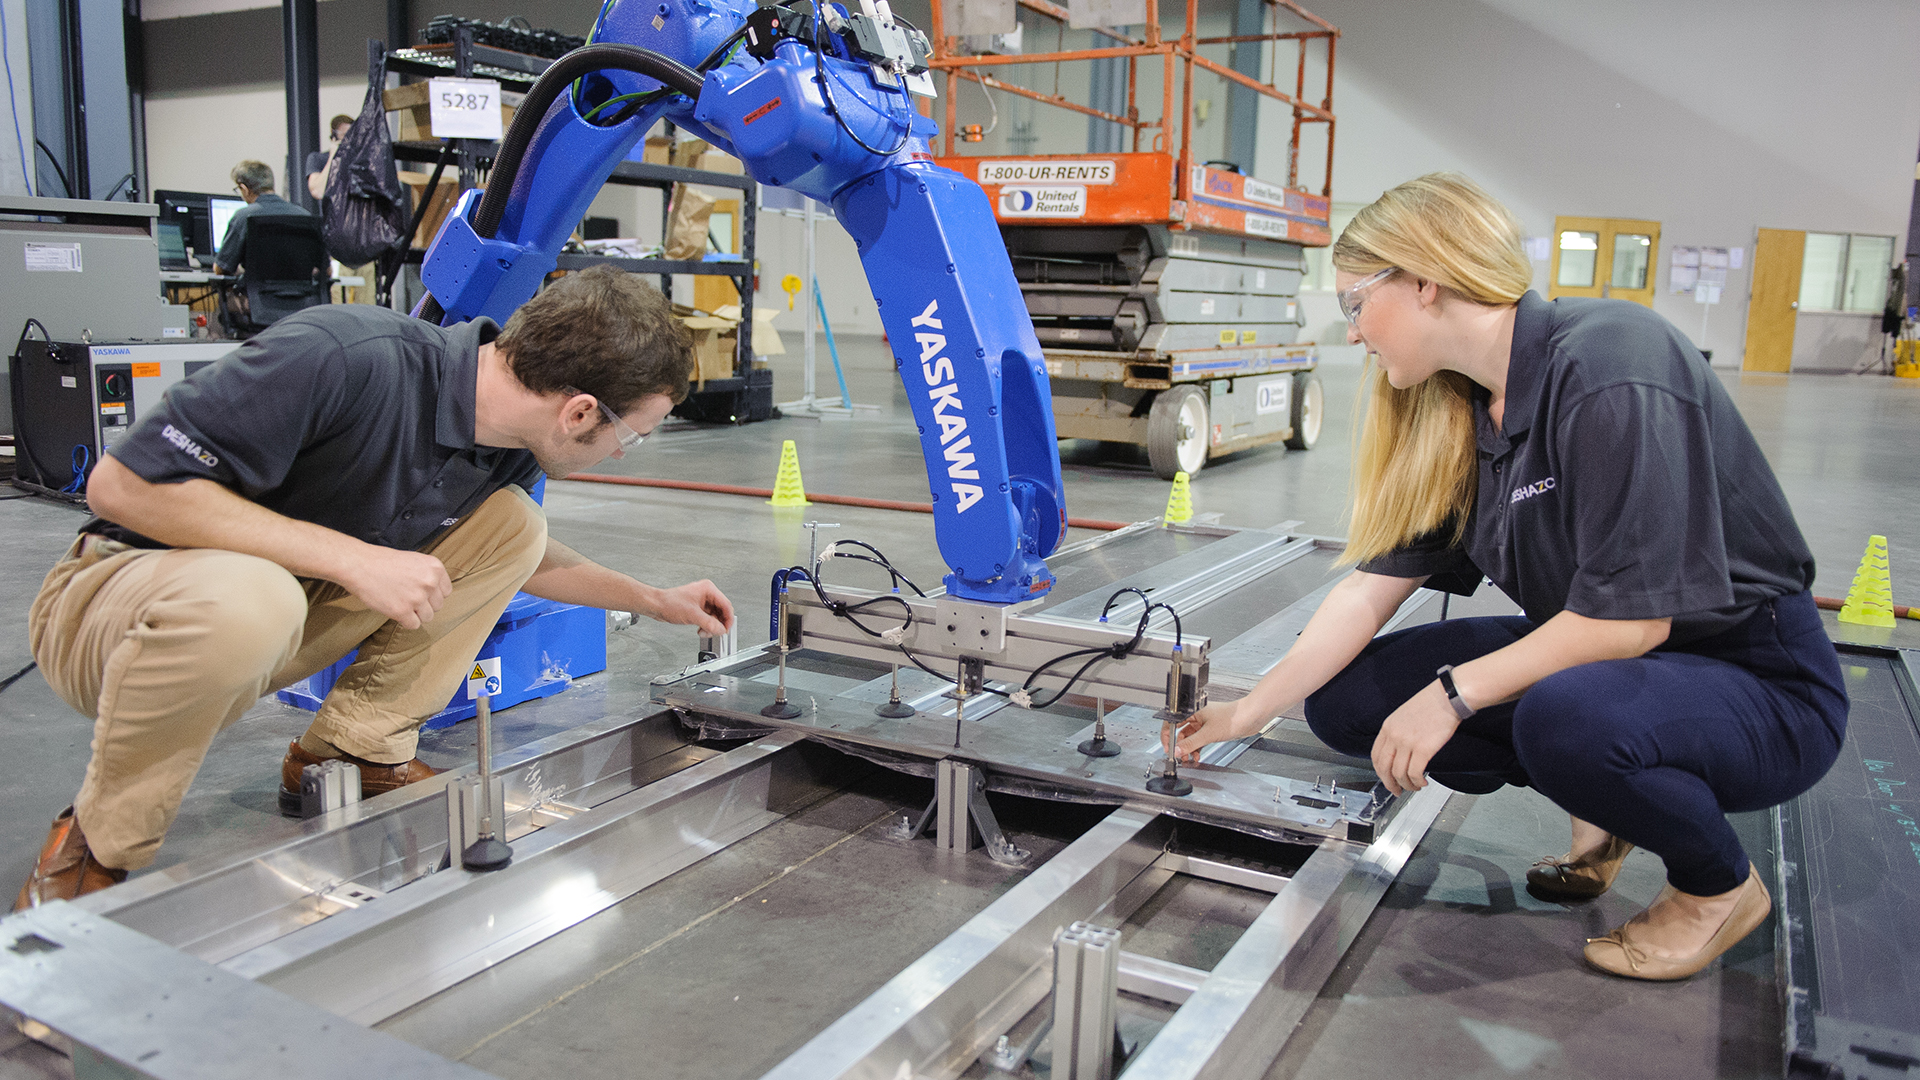 Two students working with heavy machinery on the floor of a large workspace.